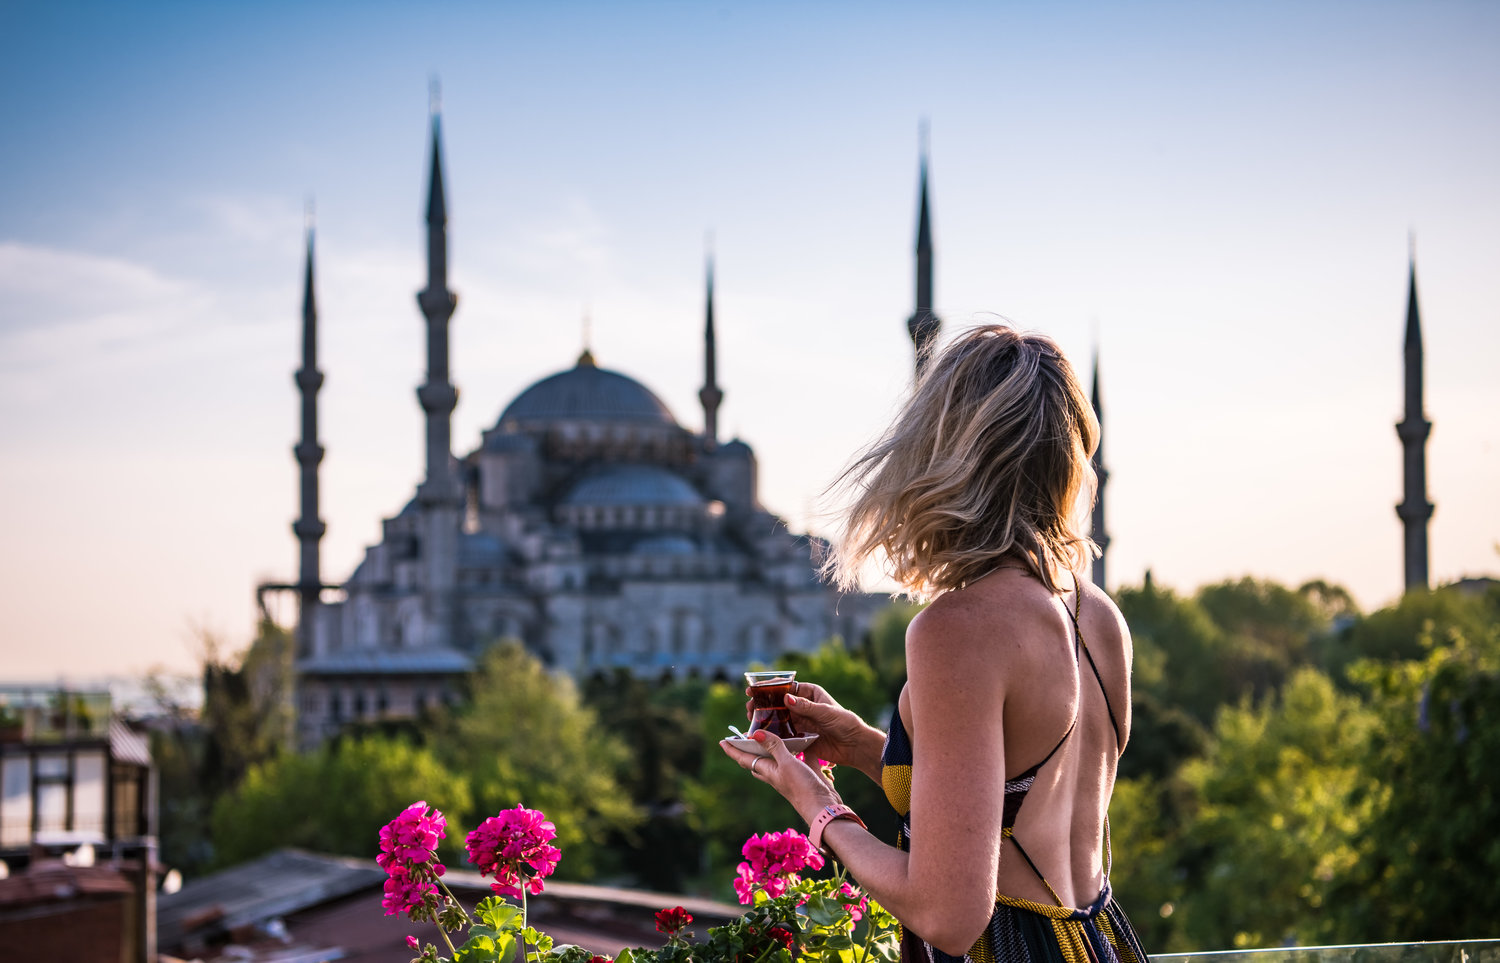 Istanbul, Turkey - One City, Two Continents, A World of Culture